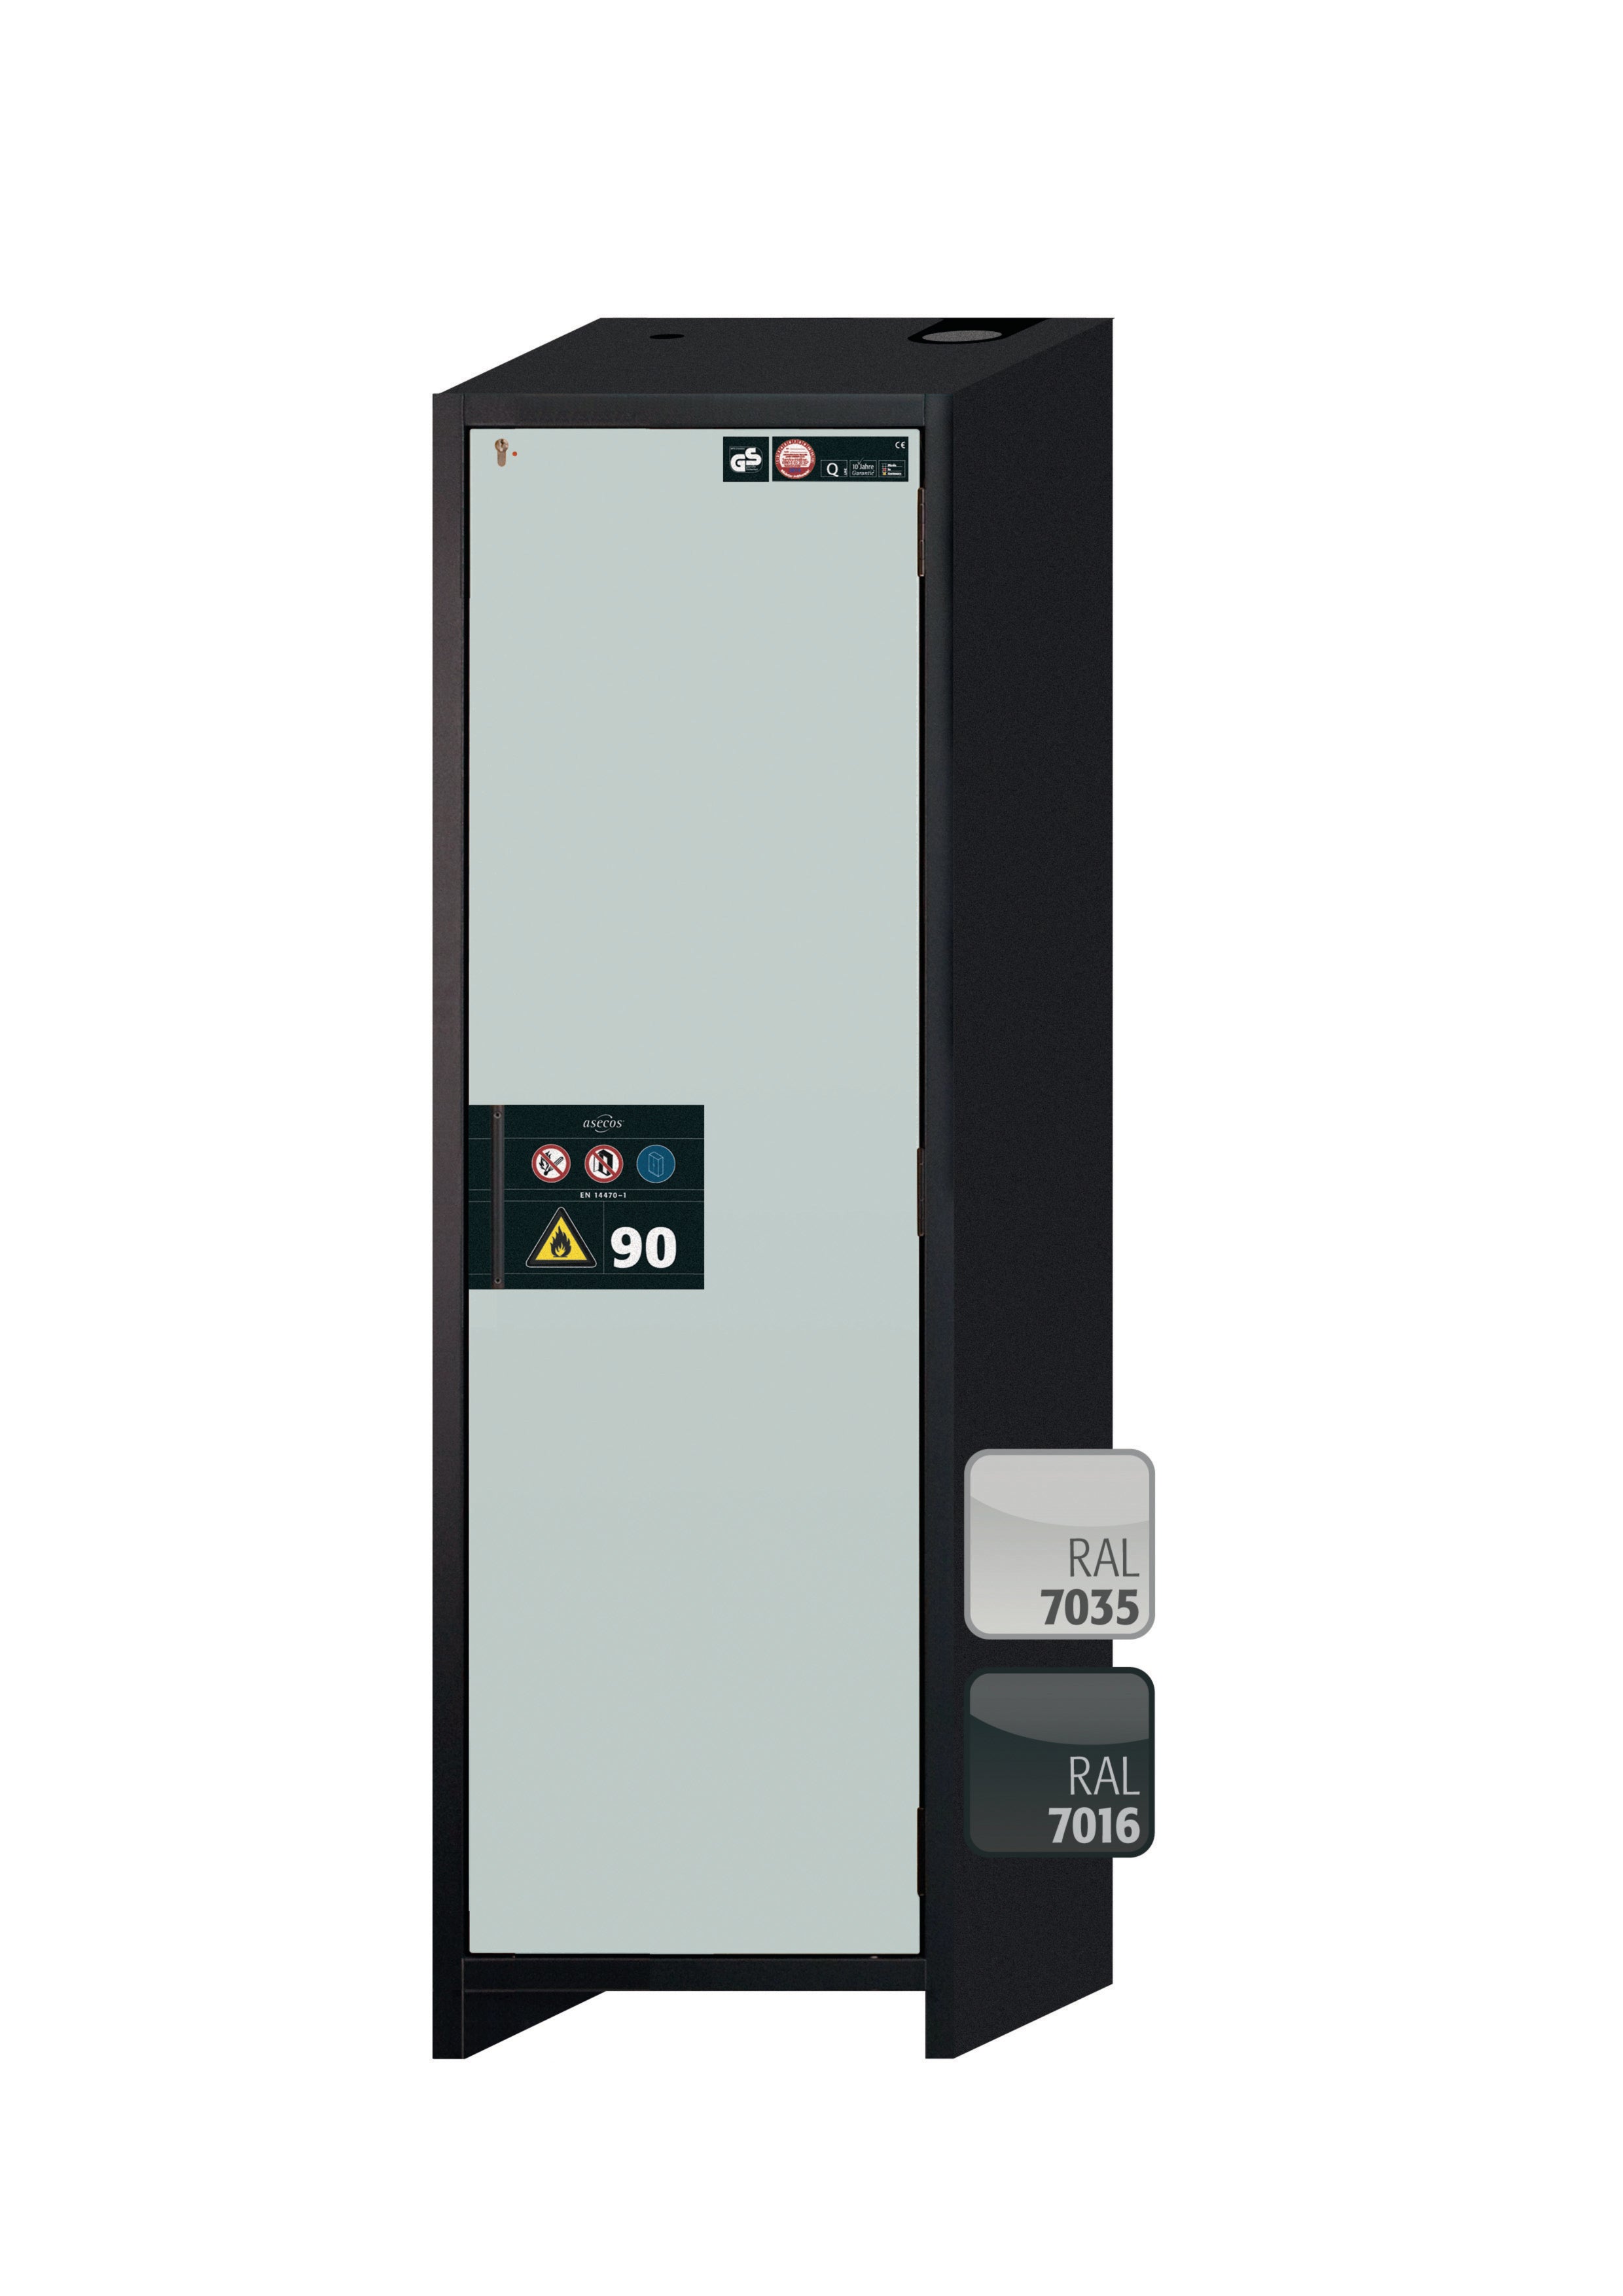 Type 90 safety storage cabinet Q-CLASSIC-90 model Q90.195.060.R in light grey RAL 7035 with 2x drawer (standard) (stainless steel 1.4301),